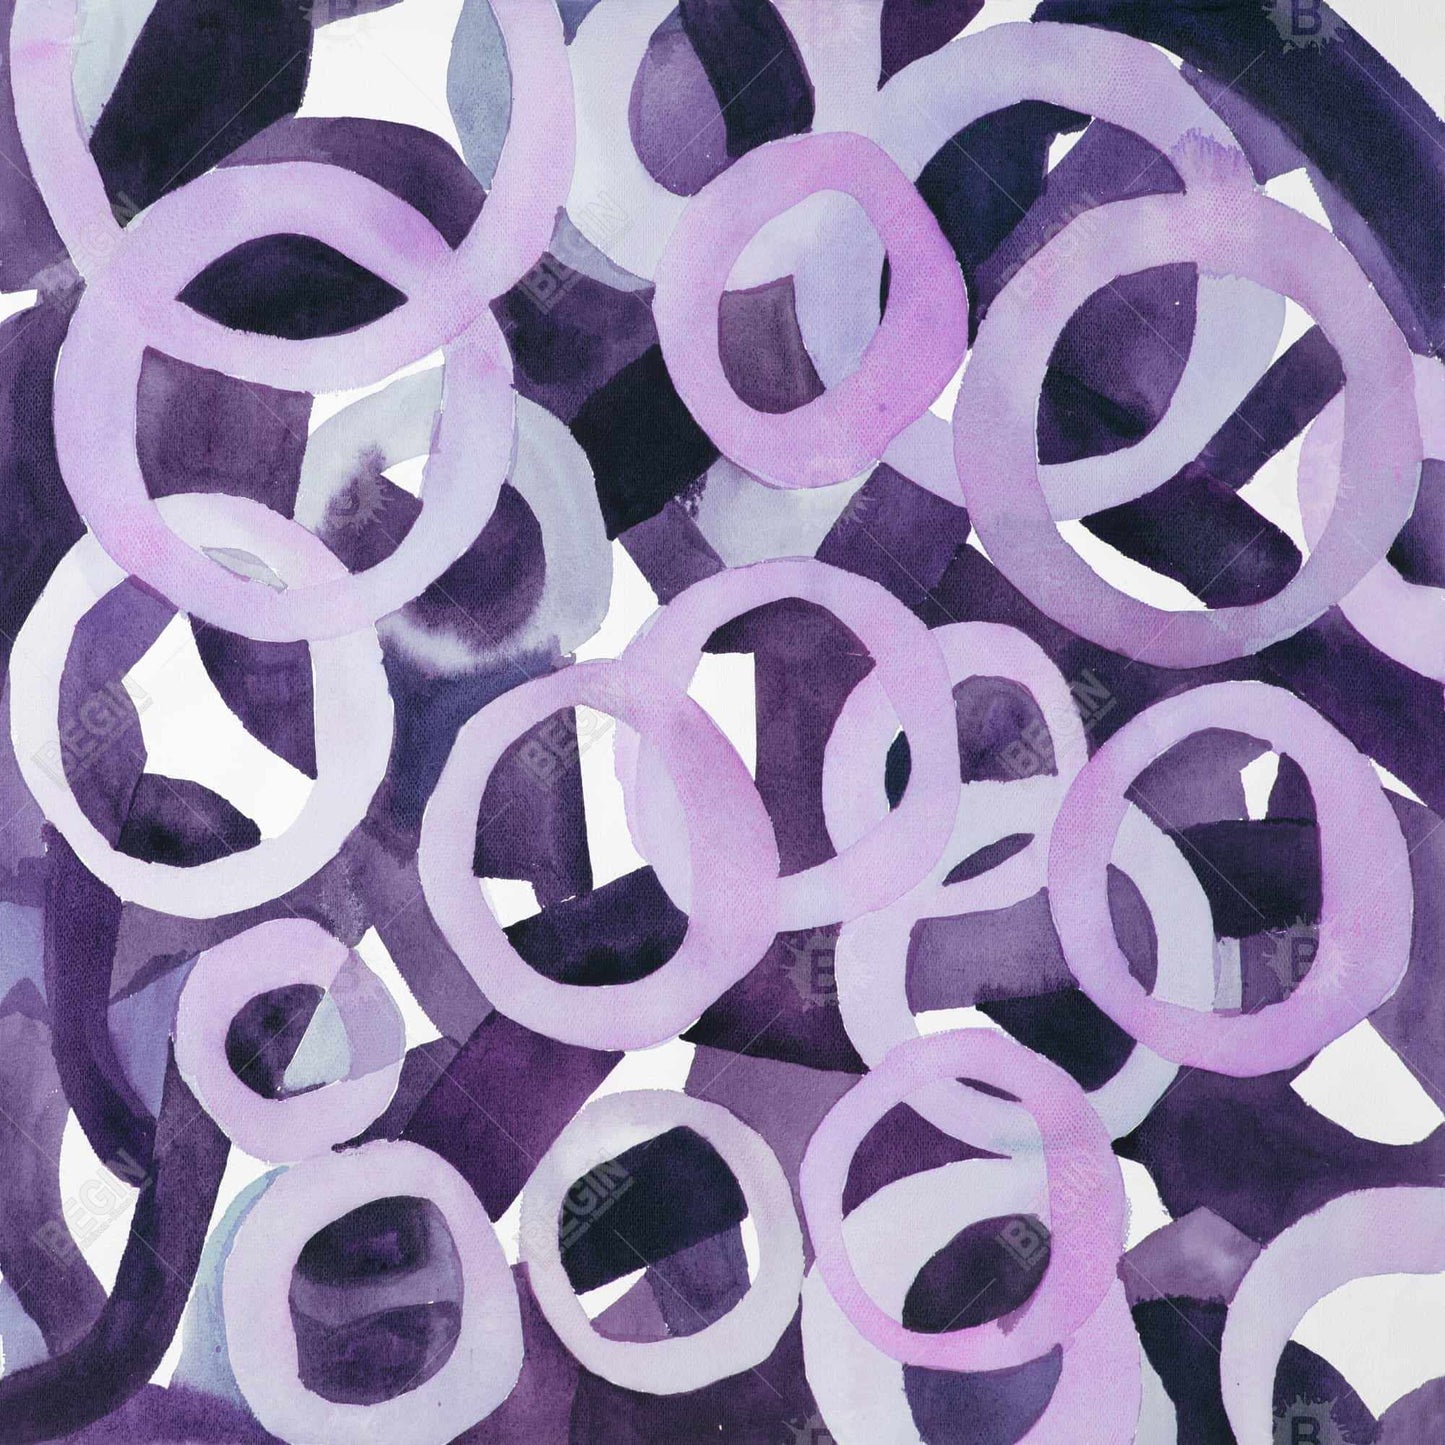 Abstract purple rings - 32x32 Print on canvas